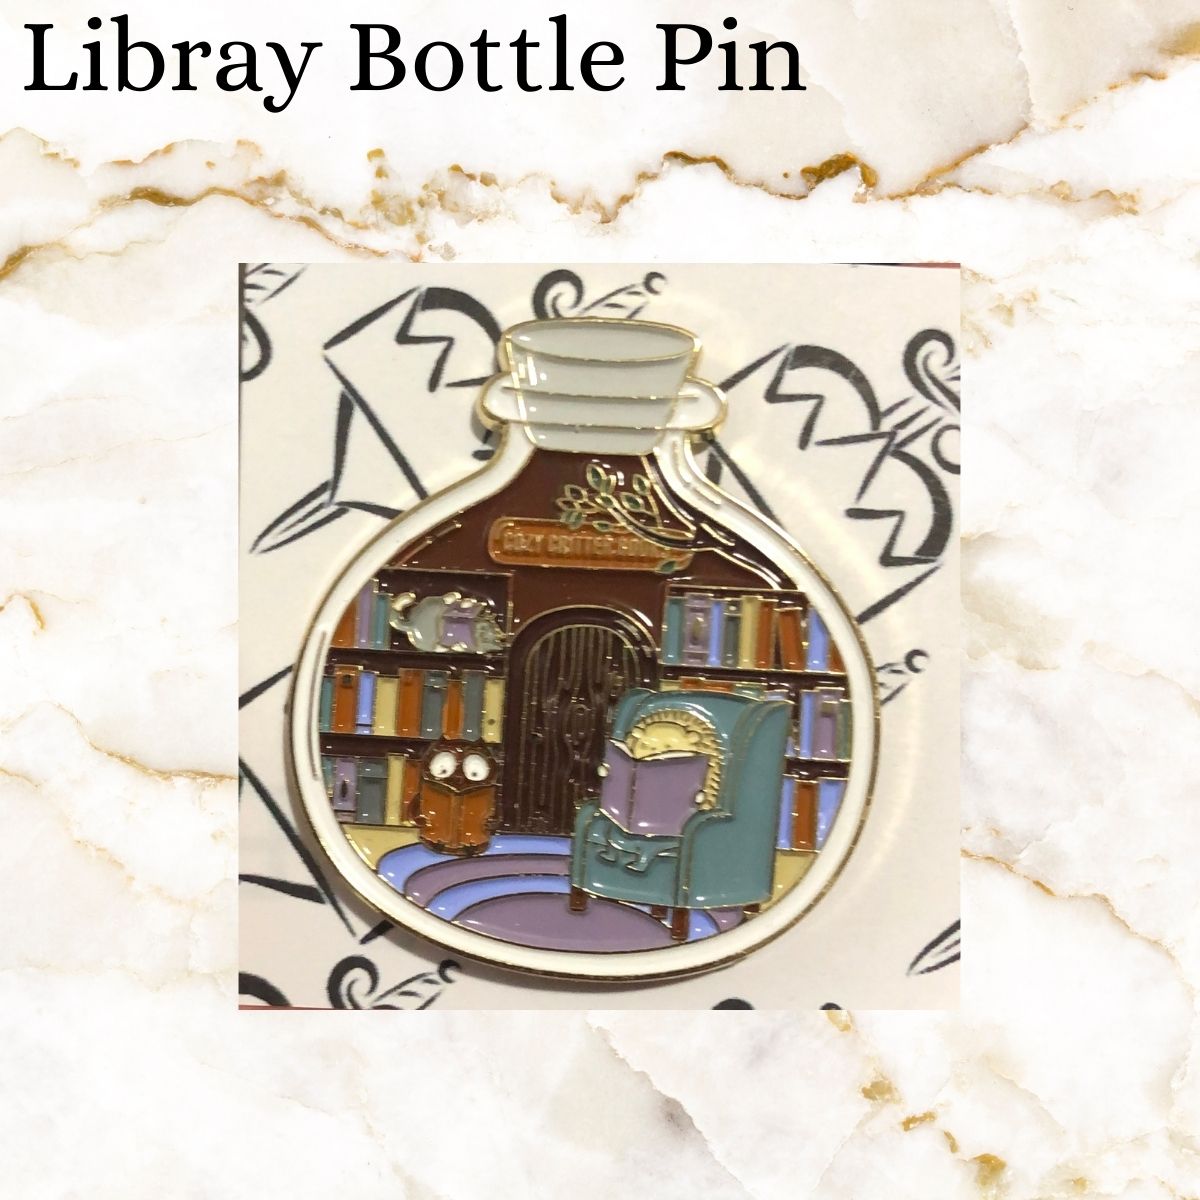 Book pin - a large bottle with a library instead it where a hedgehog and owl are reading books - hedgehog in a chair, owl on the carpet